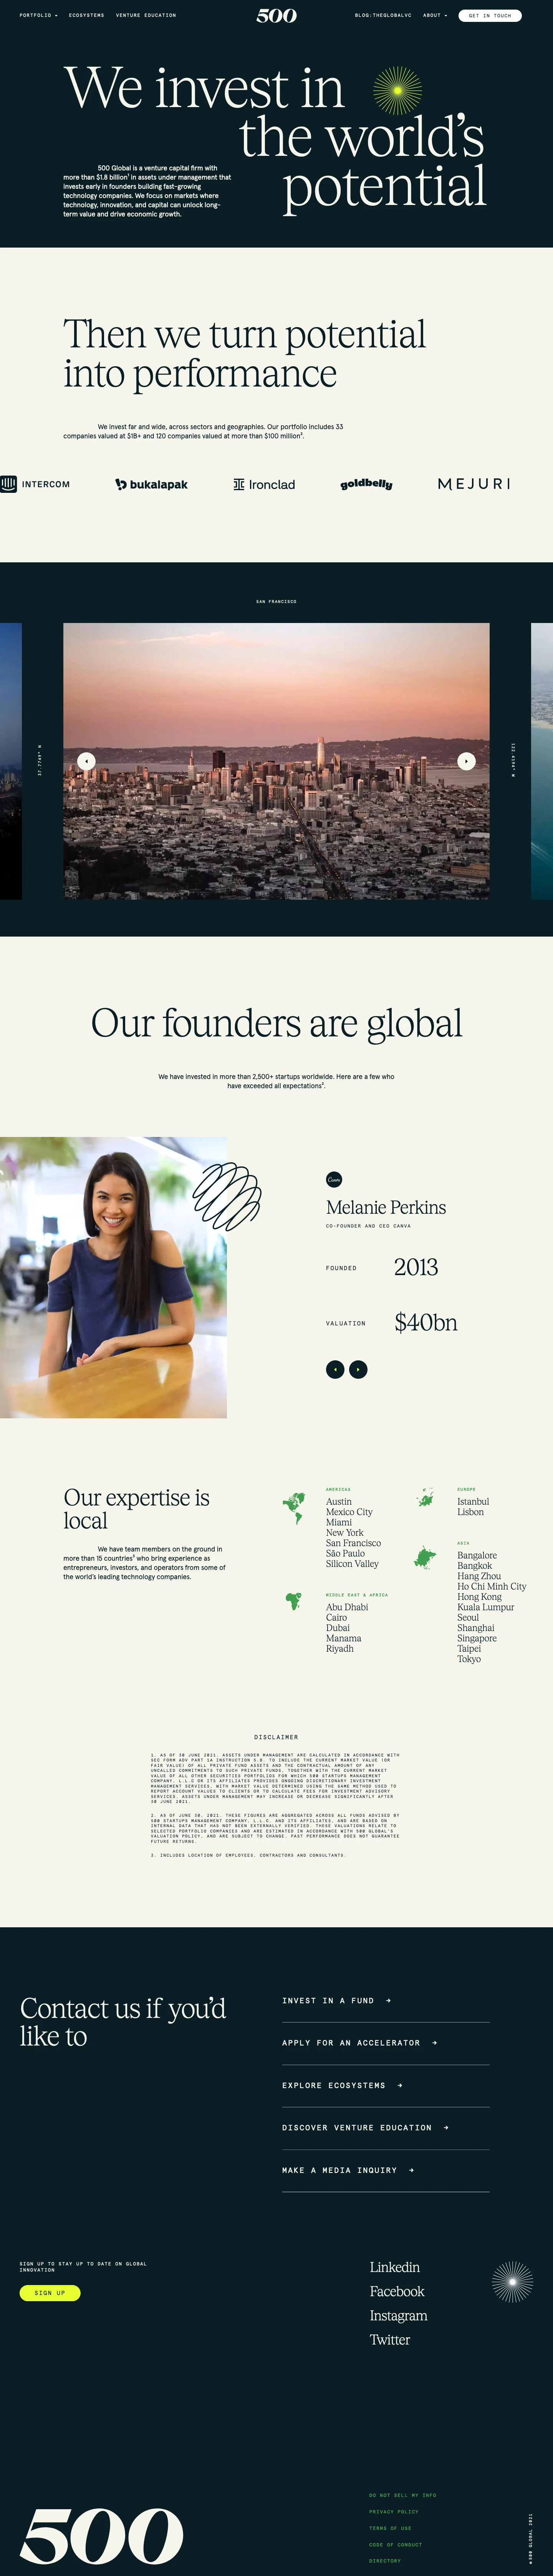 500 Global Landing Page Example: 500 Global is a venture capital firm with more than $1.8 billion¹ in assets under management that invests early in founders building fast-growing technology companies.